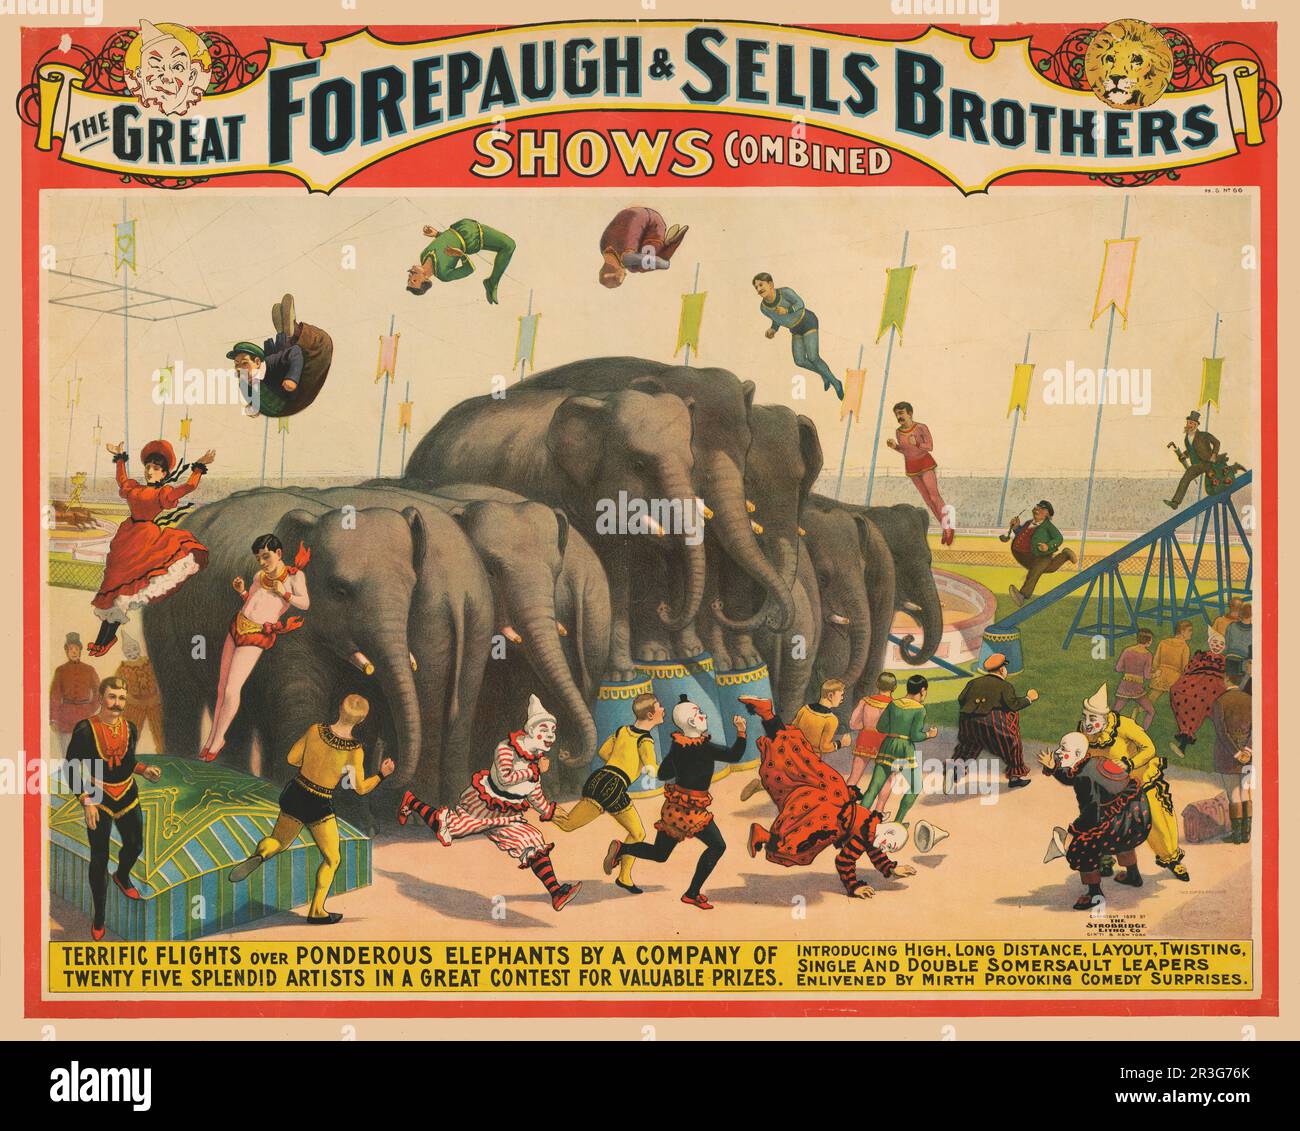 Vintage Forepaugh & Sells Brothers circus poster showing acrobats jumping over elephants, circa 1899. Stock Photo